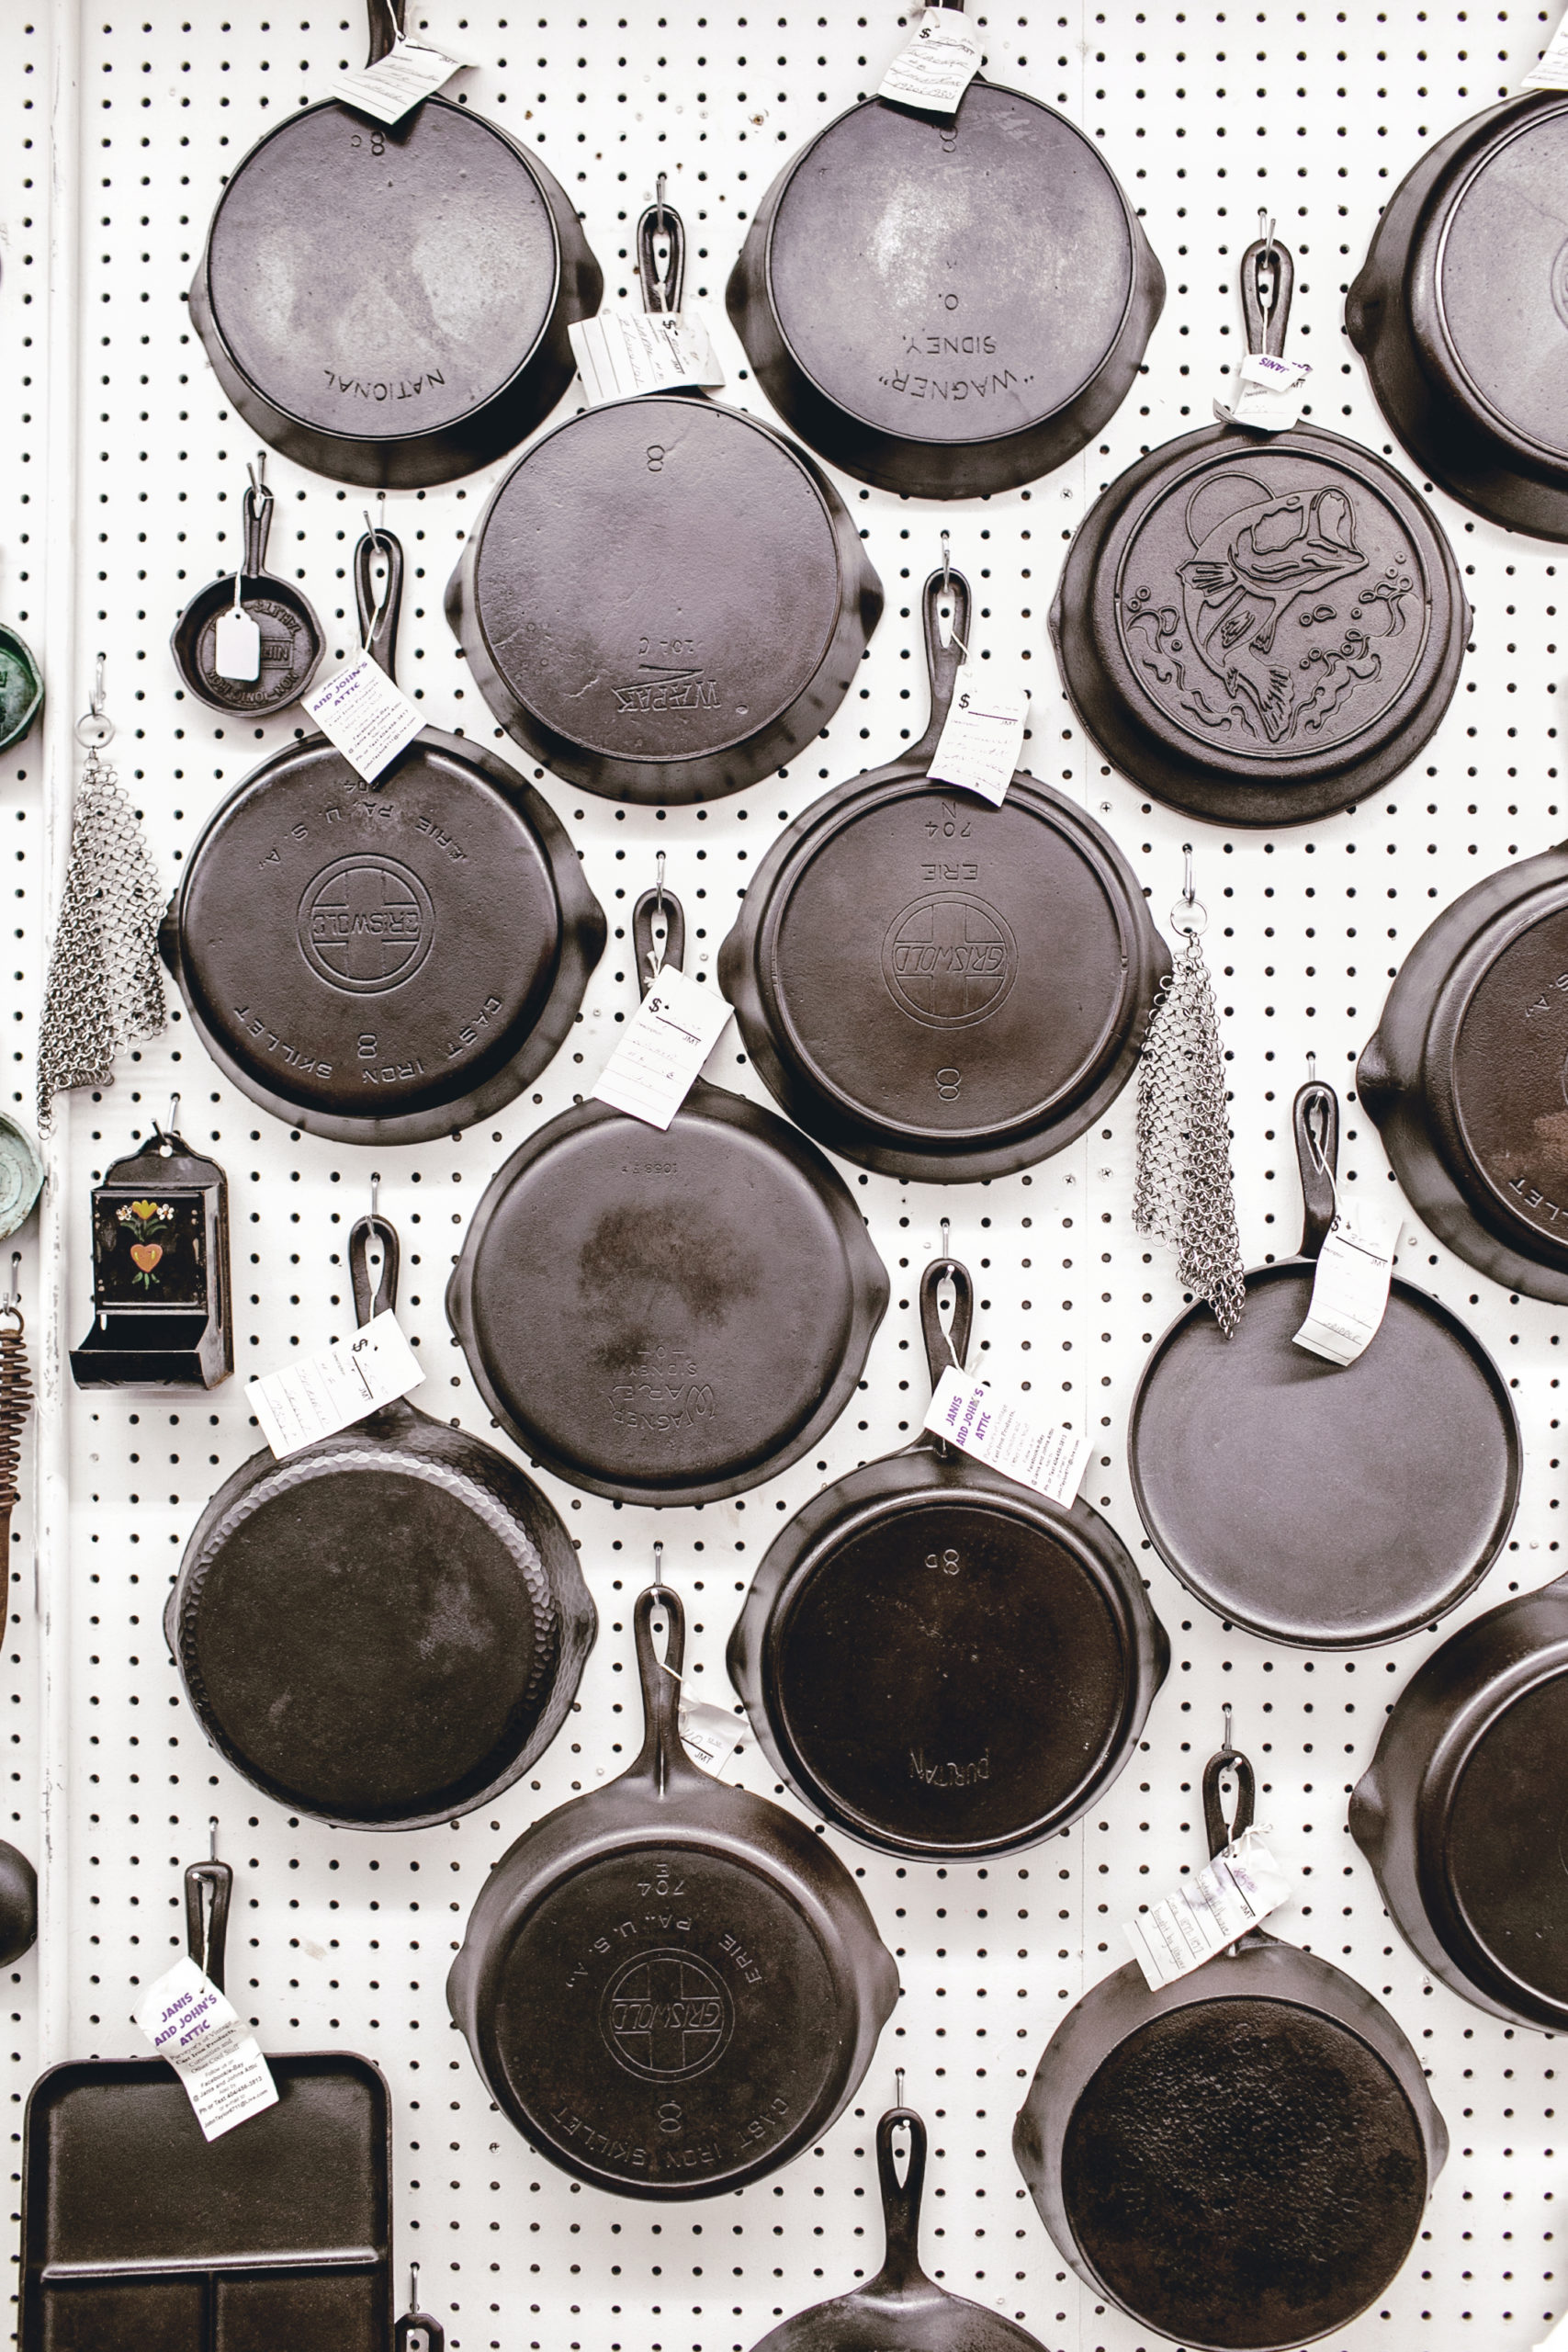 Vintage cookware is having a moment